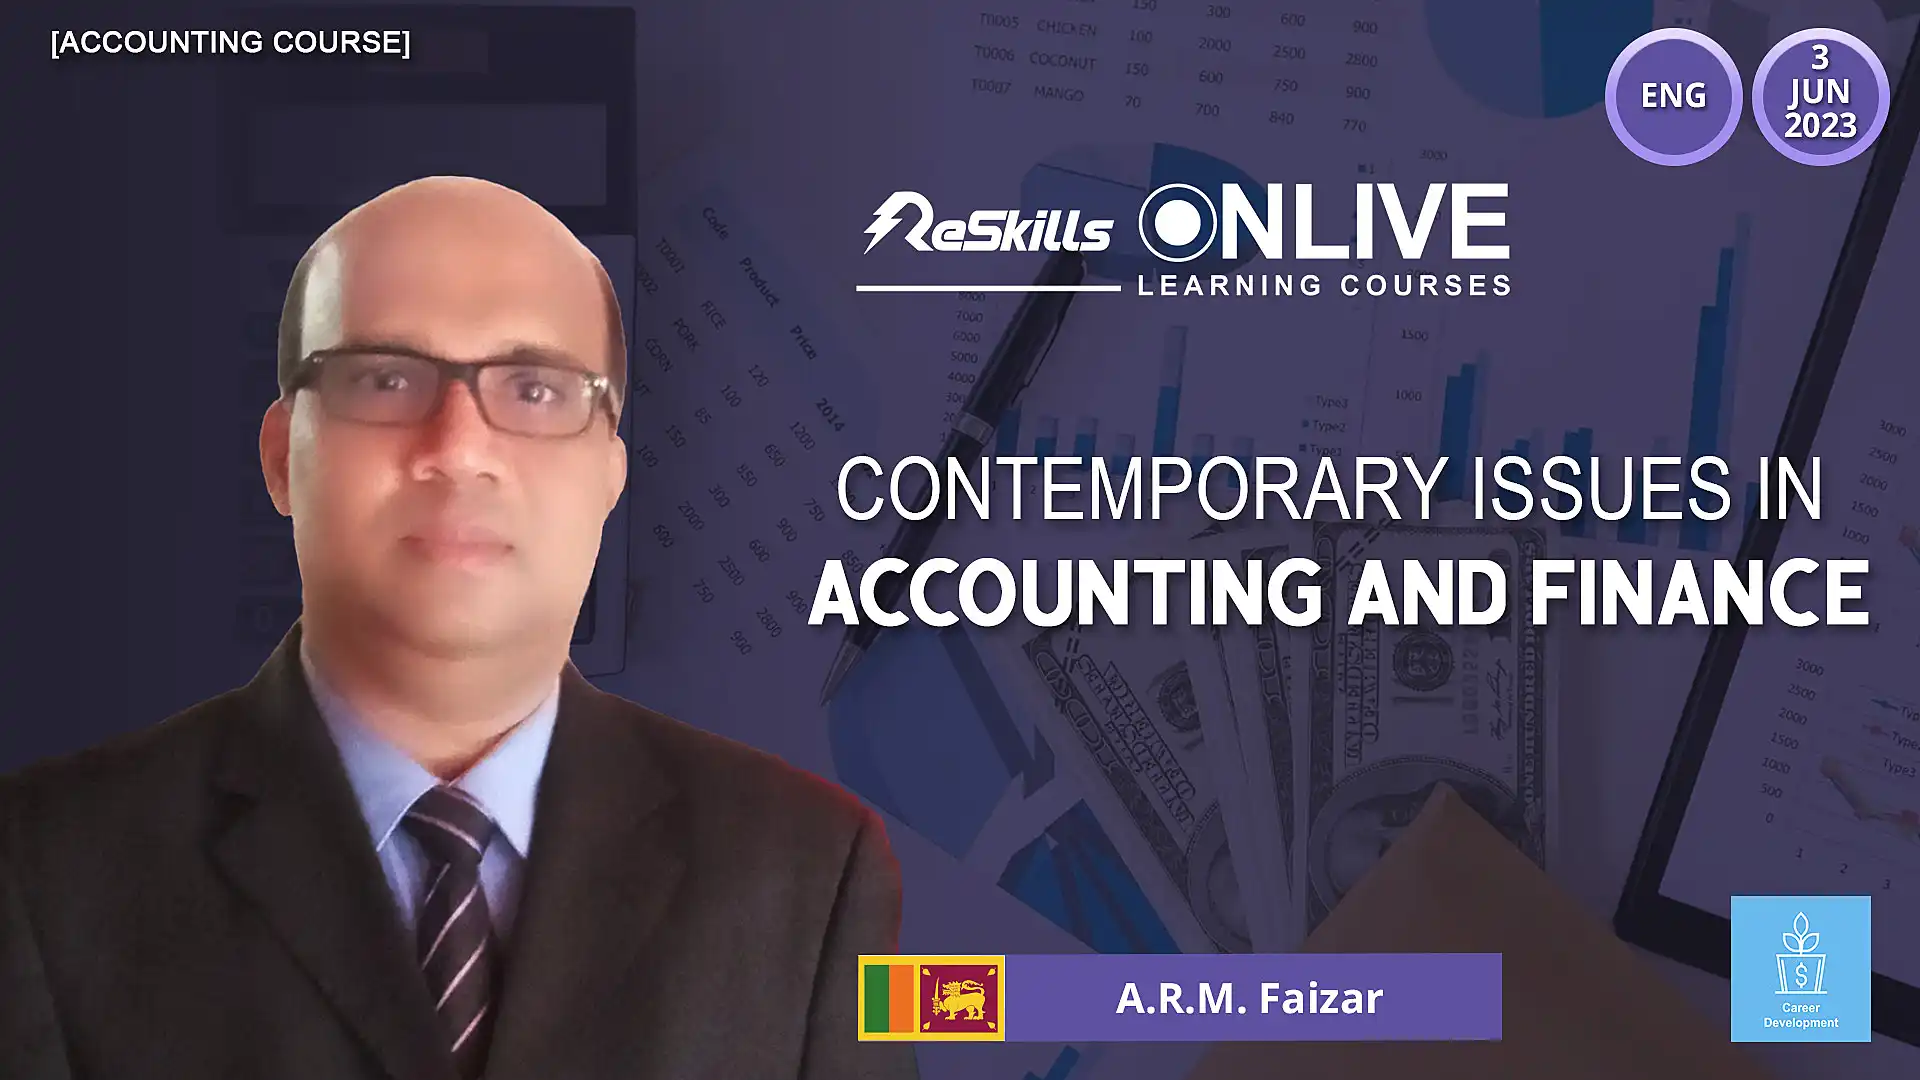 [Accounting Course] Contemporary Issues in Accounting and Finance - ReSkills